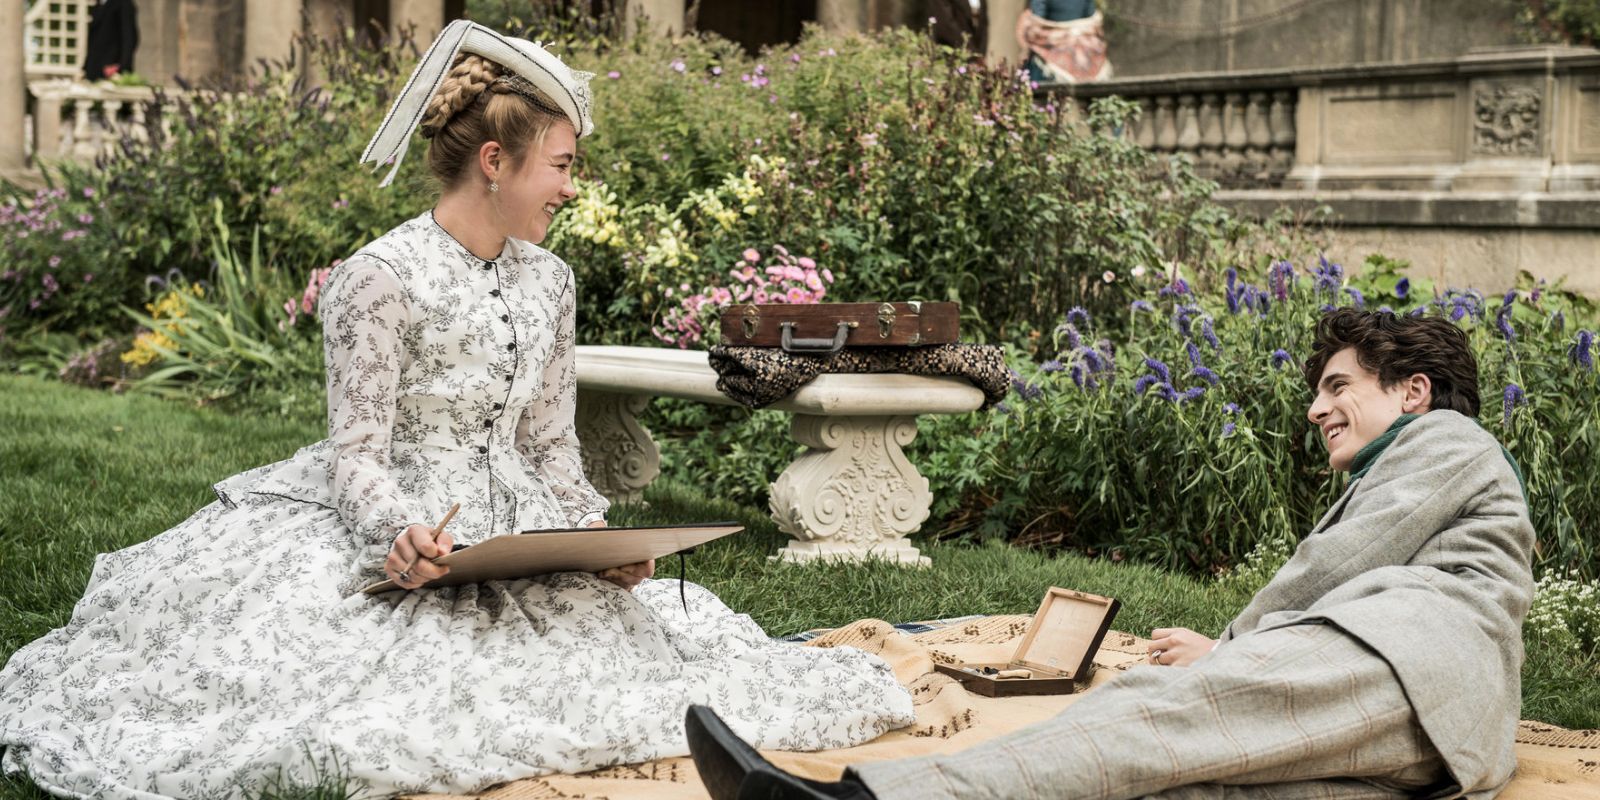 Amy and Laurie on a picnic in Little Women (2019)